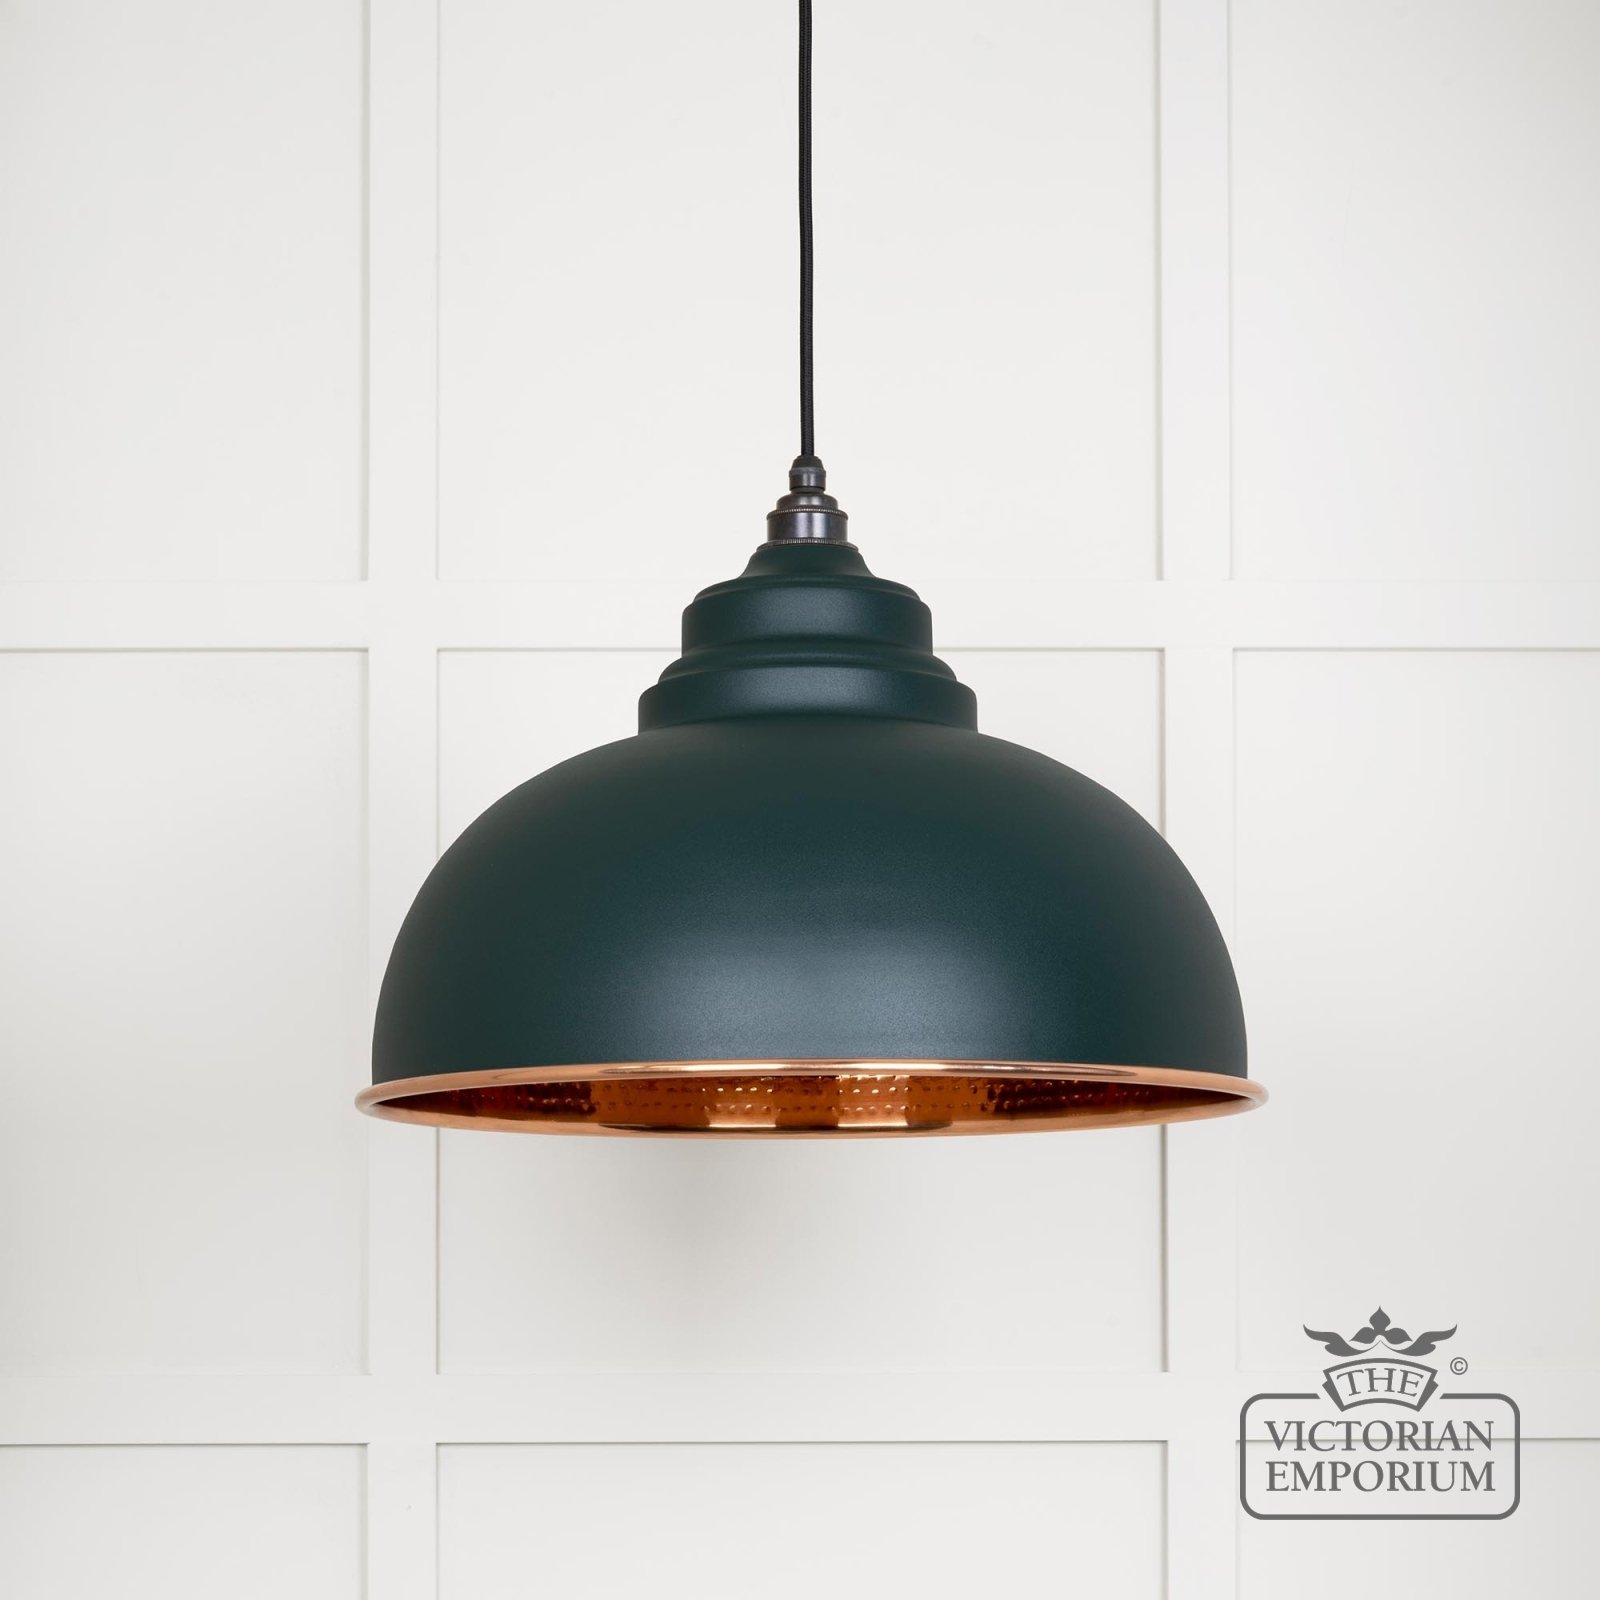 Harlow pendant light in Dingle with hammered copper interior